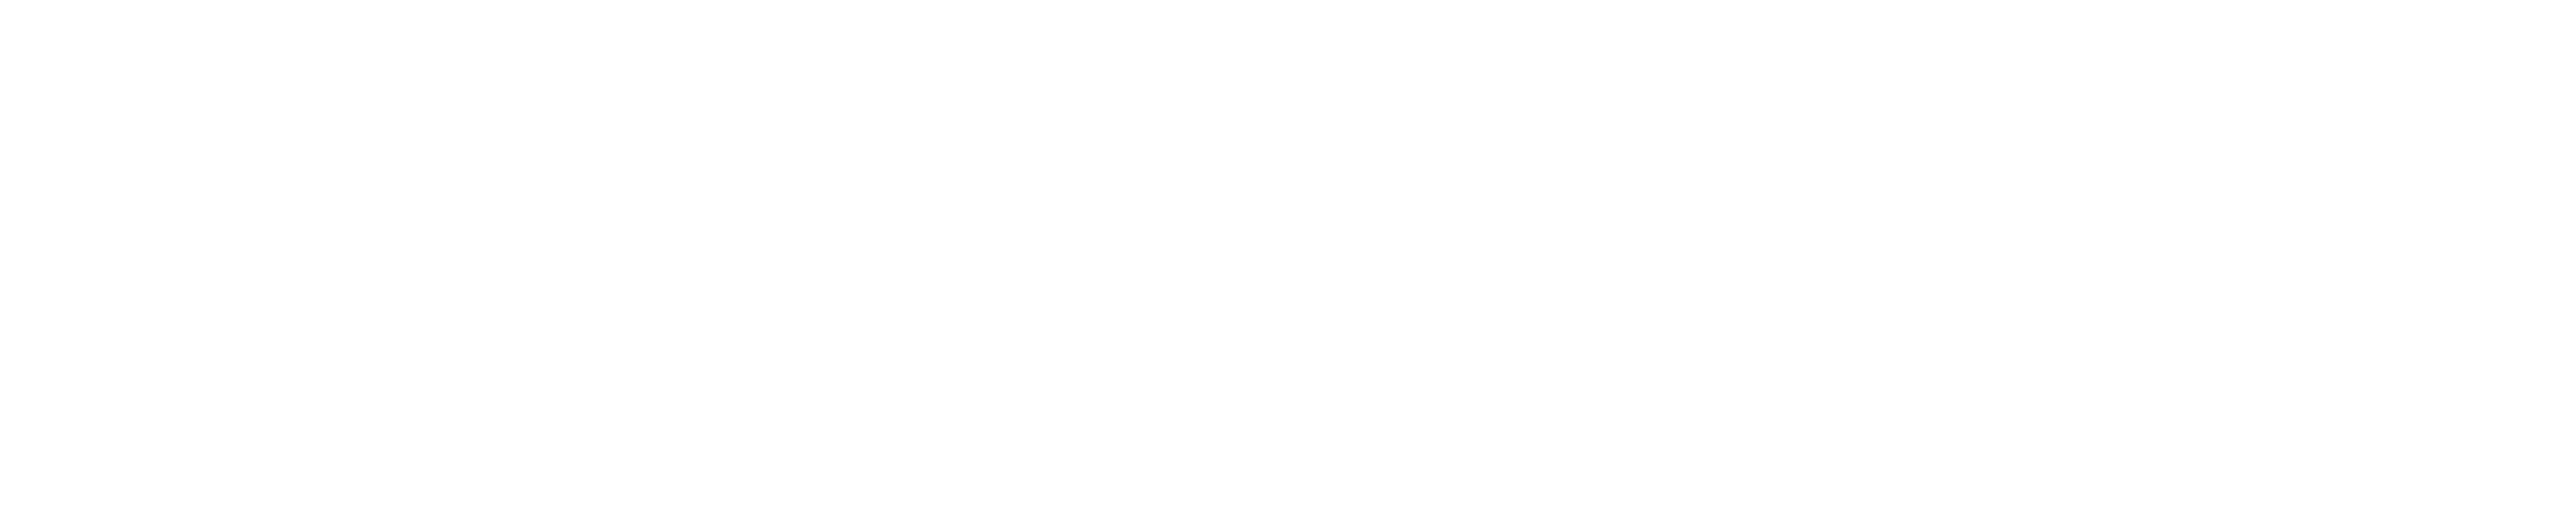 text that reads 'True Tales of Sex, Success, and Sex and the City''